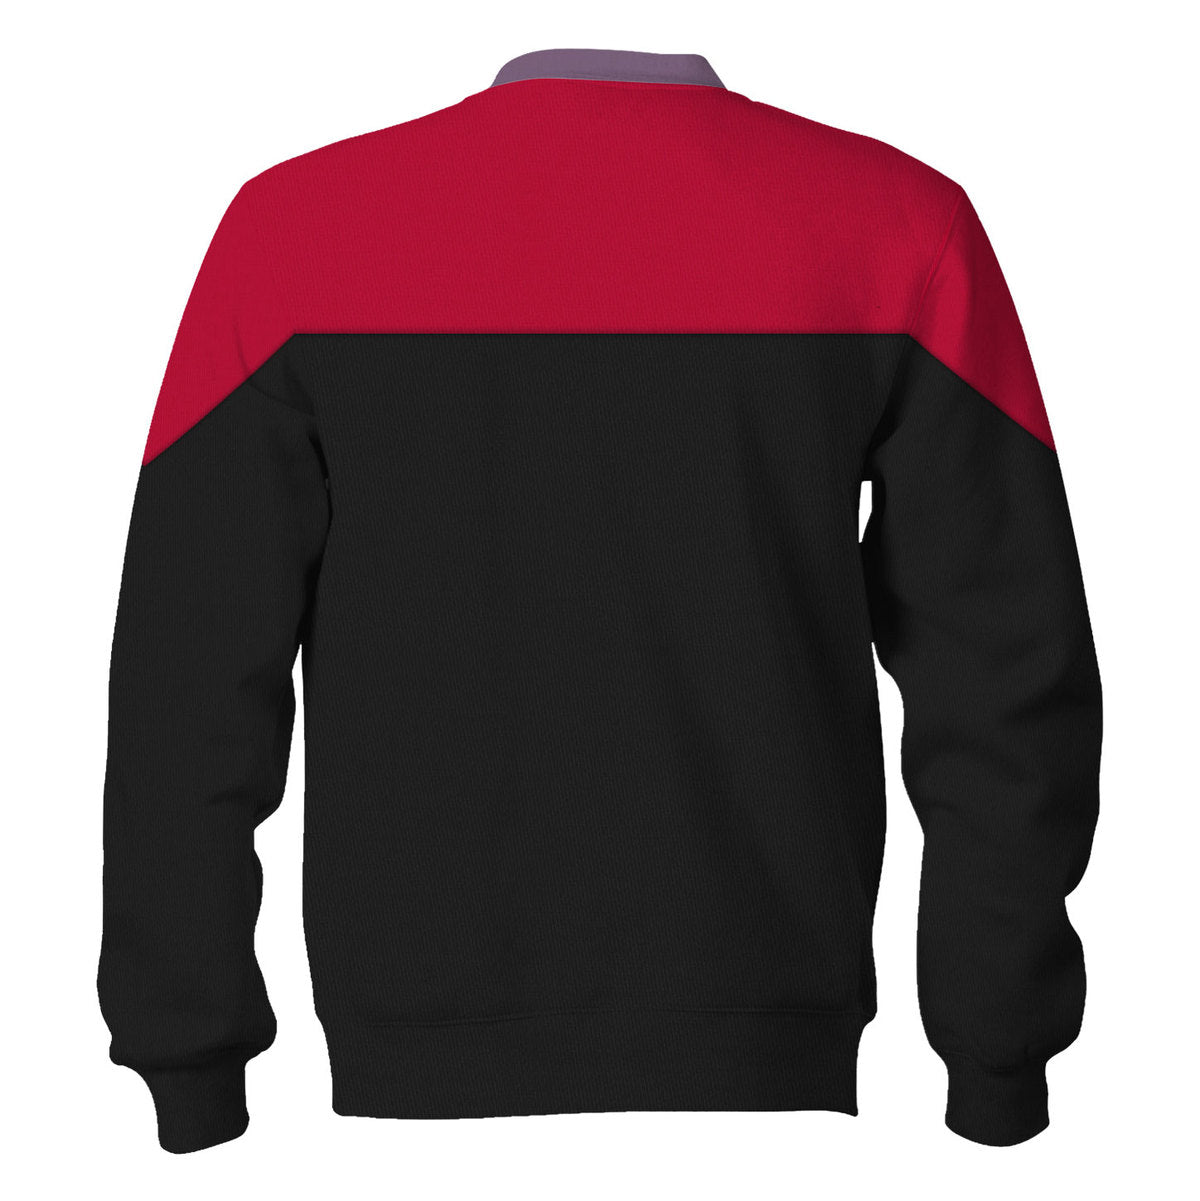 Star Trek Voyager Red Costume Cool - Sweater - Ugly Christmas Sweater